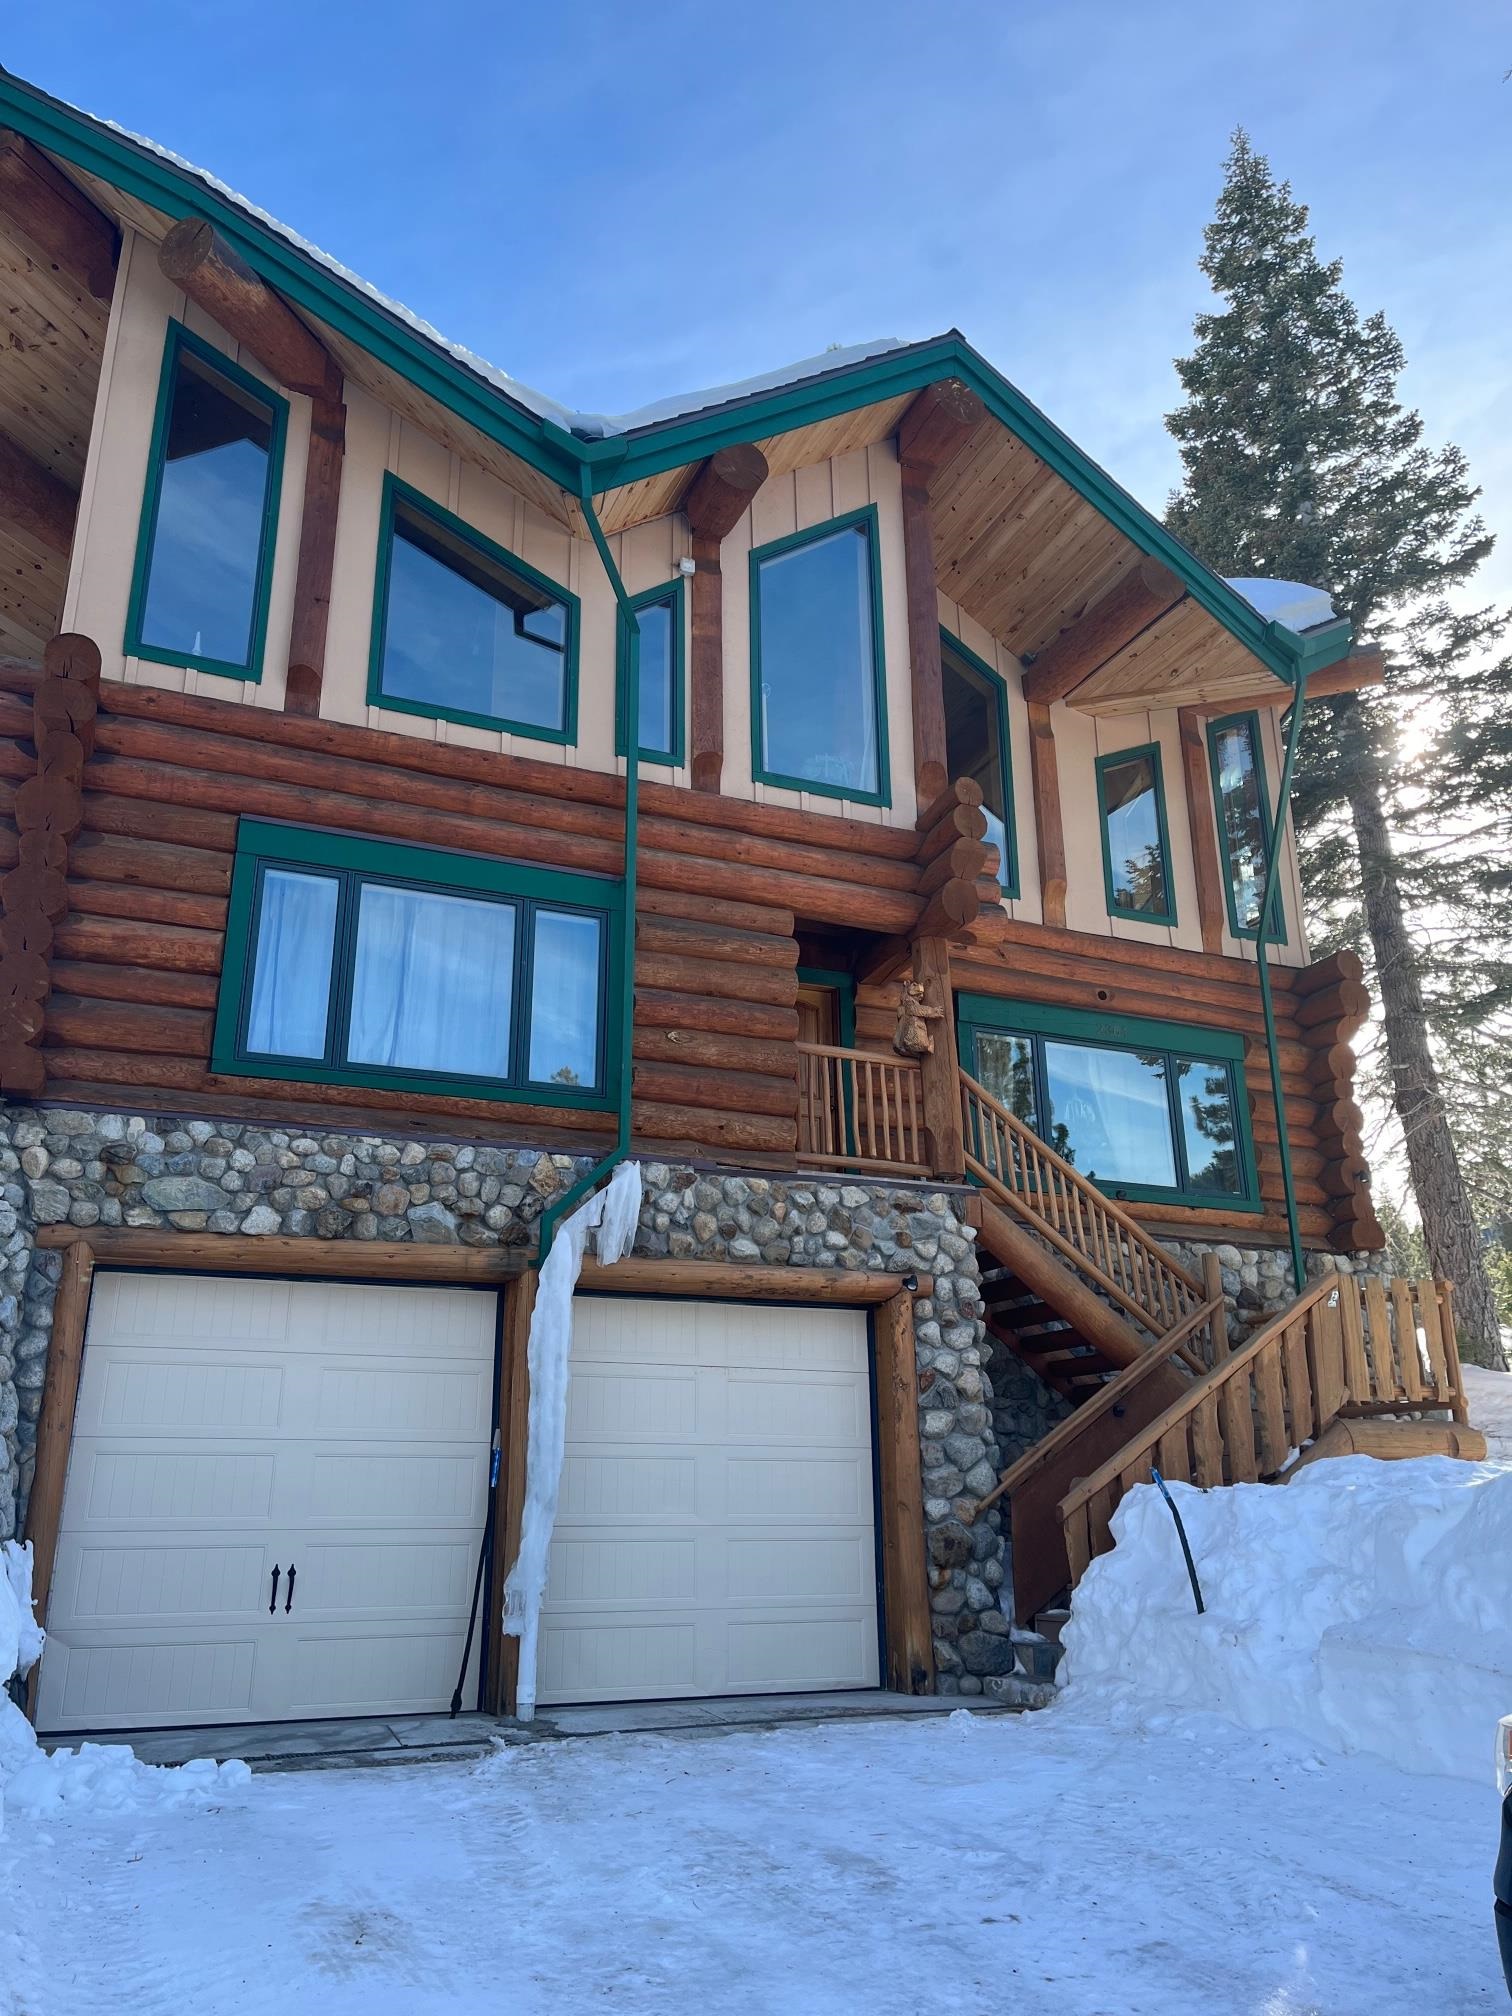 Super cute log cabin!   3 bdrms, 2 shower bath rooms and a full bath in the main house.  Vaulted ceilings, updated kitchen, oversized 2.5 car garage.   Then there is the adorable additional dwelling unit.   Studio loft style!